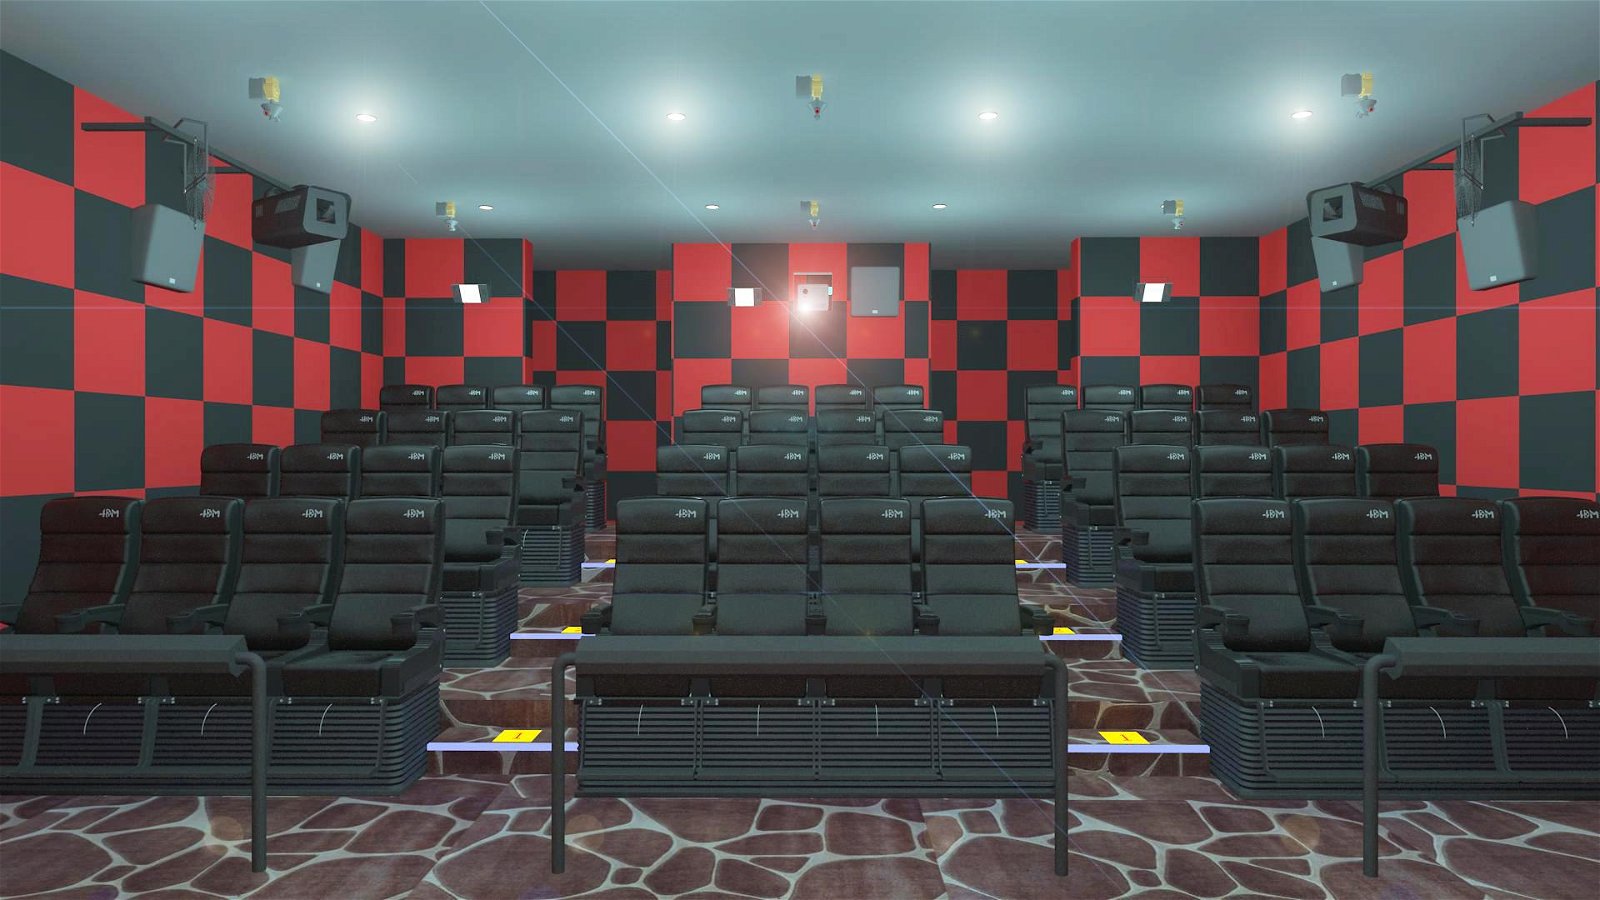 5 Seats / 4D Cinema System，Luxury Motion Seats With Spray Air And Vibration 2